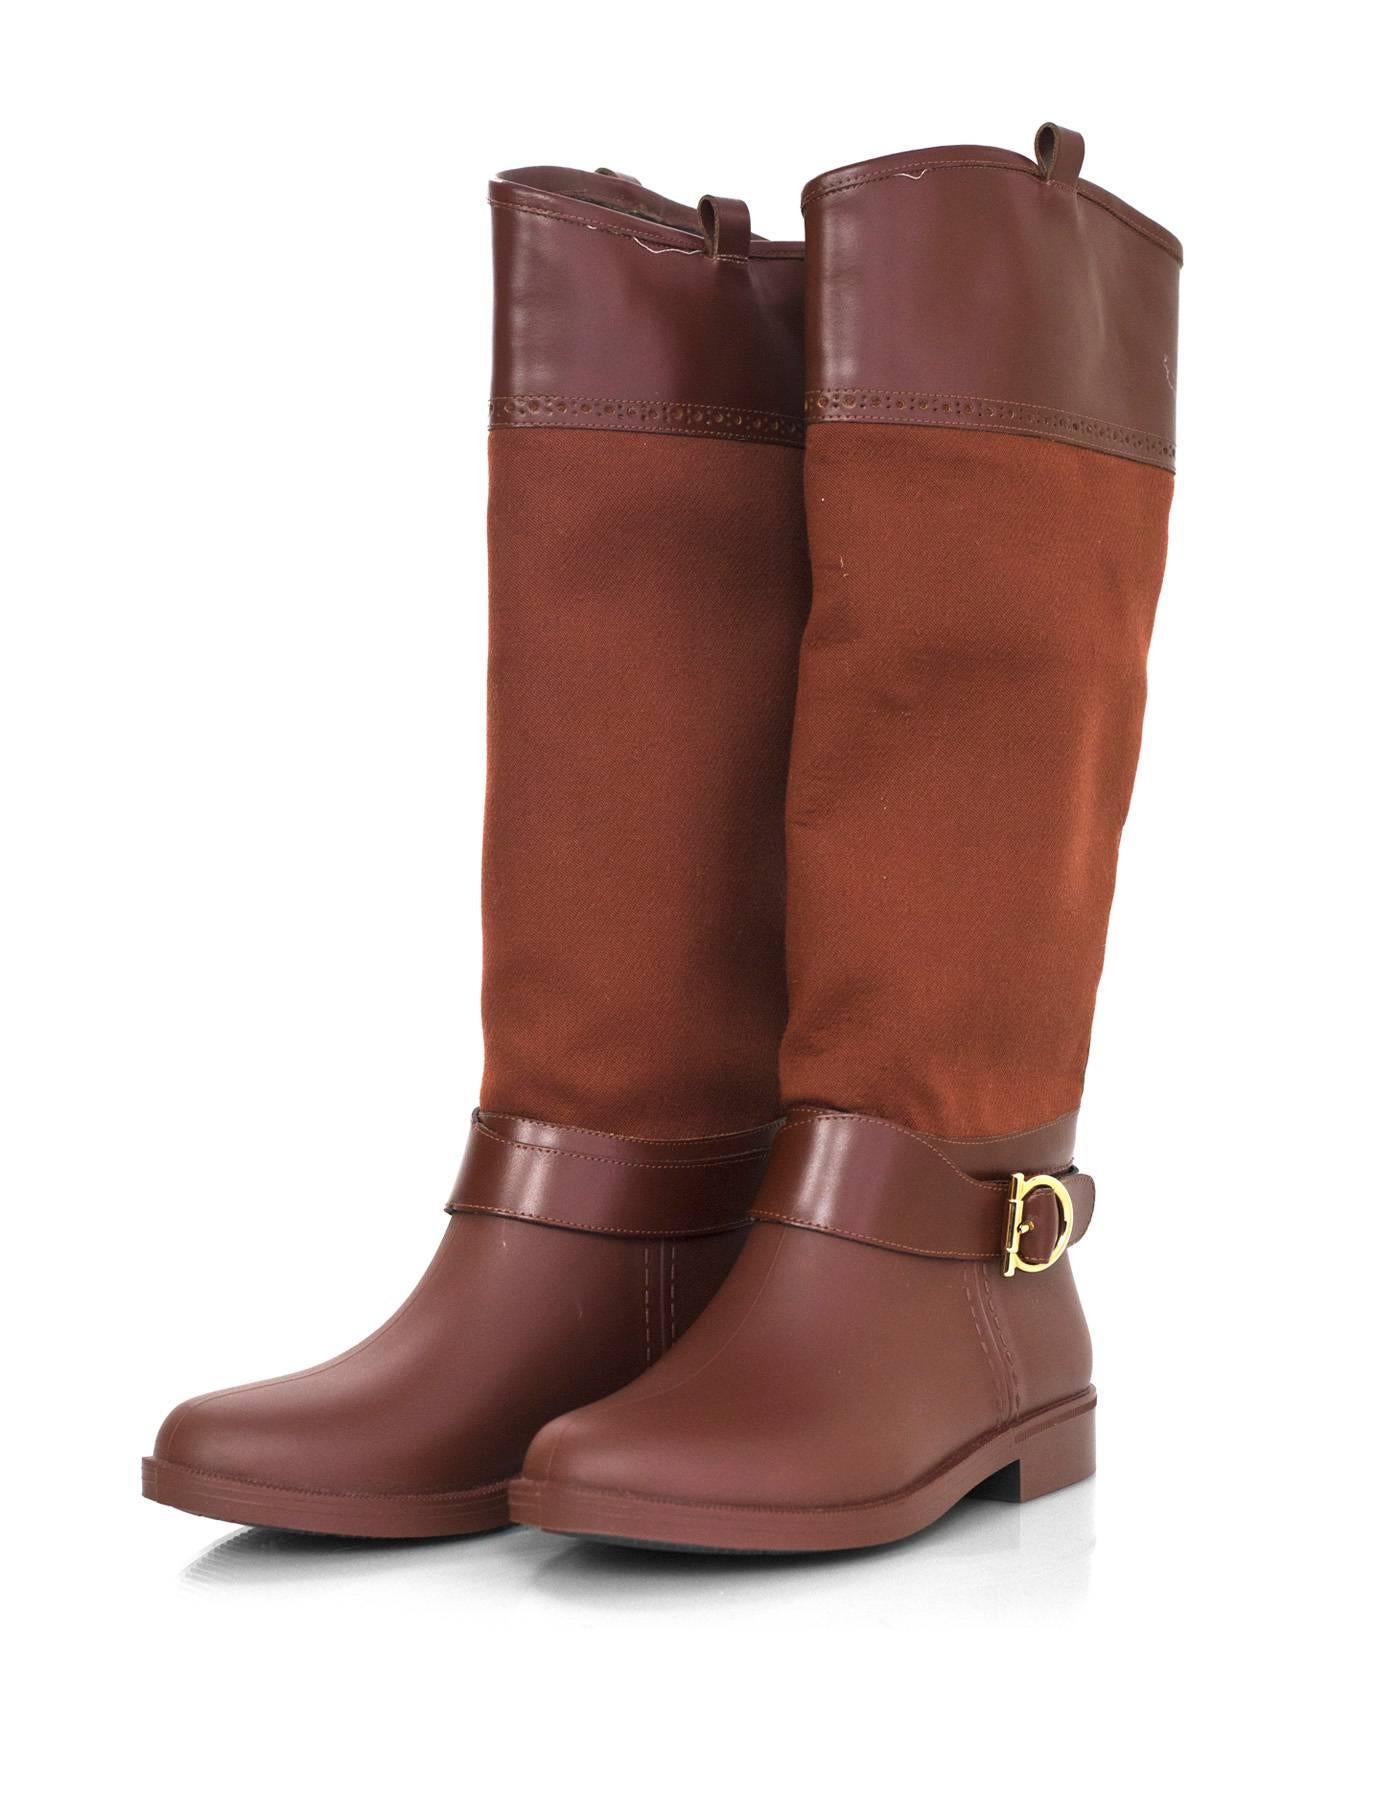 Salvatore Ferragamo Rust Riding Boots Sz 5
Features canvas shaft with leather trim and rubber feet and soles

Made In: Italy
Color: Ruse
Materials: Canvas, rubber, suede
Closure/Opening: Slide on
Sole Stamp: Salvatore Ferragamo Made in Italy